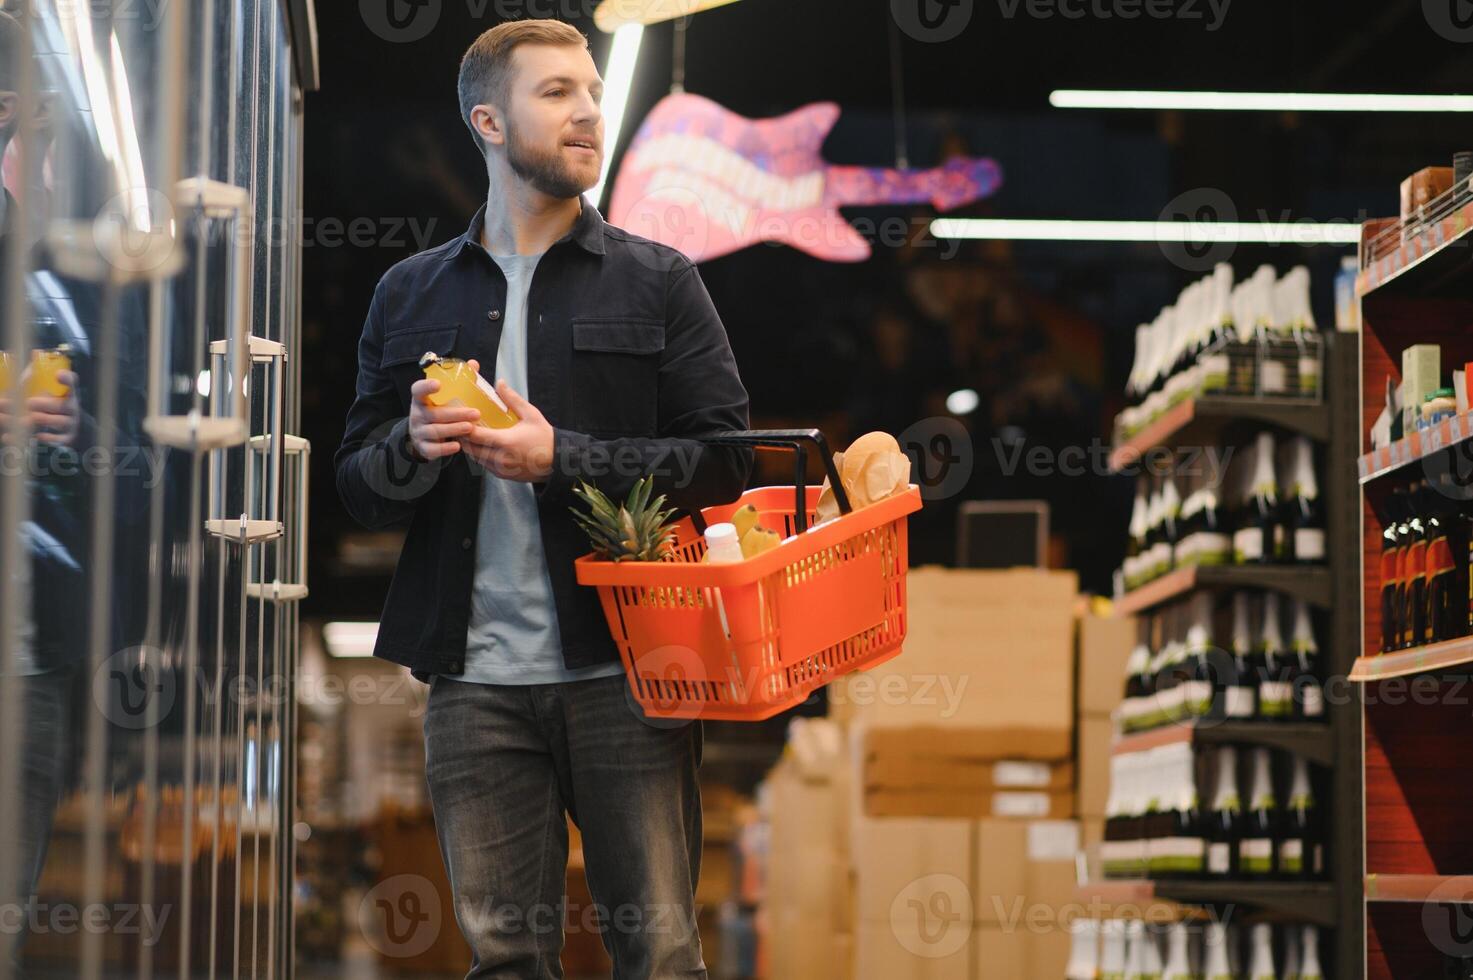 Customer In Supermarket. Man Doing Grocery Shopping Standing With Cart Choosing Food Product Indoors. Guy Buying Groceries In Food Store. Selective Focus, Copy Space. photo